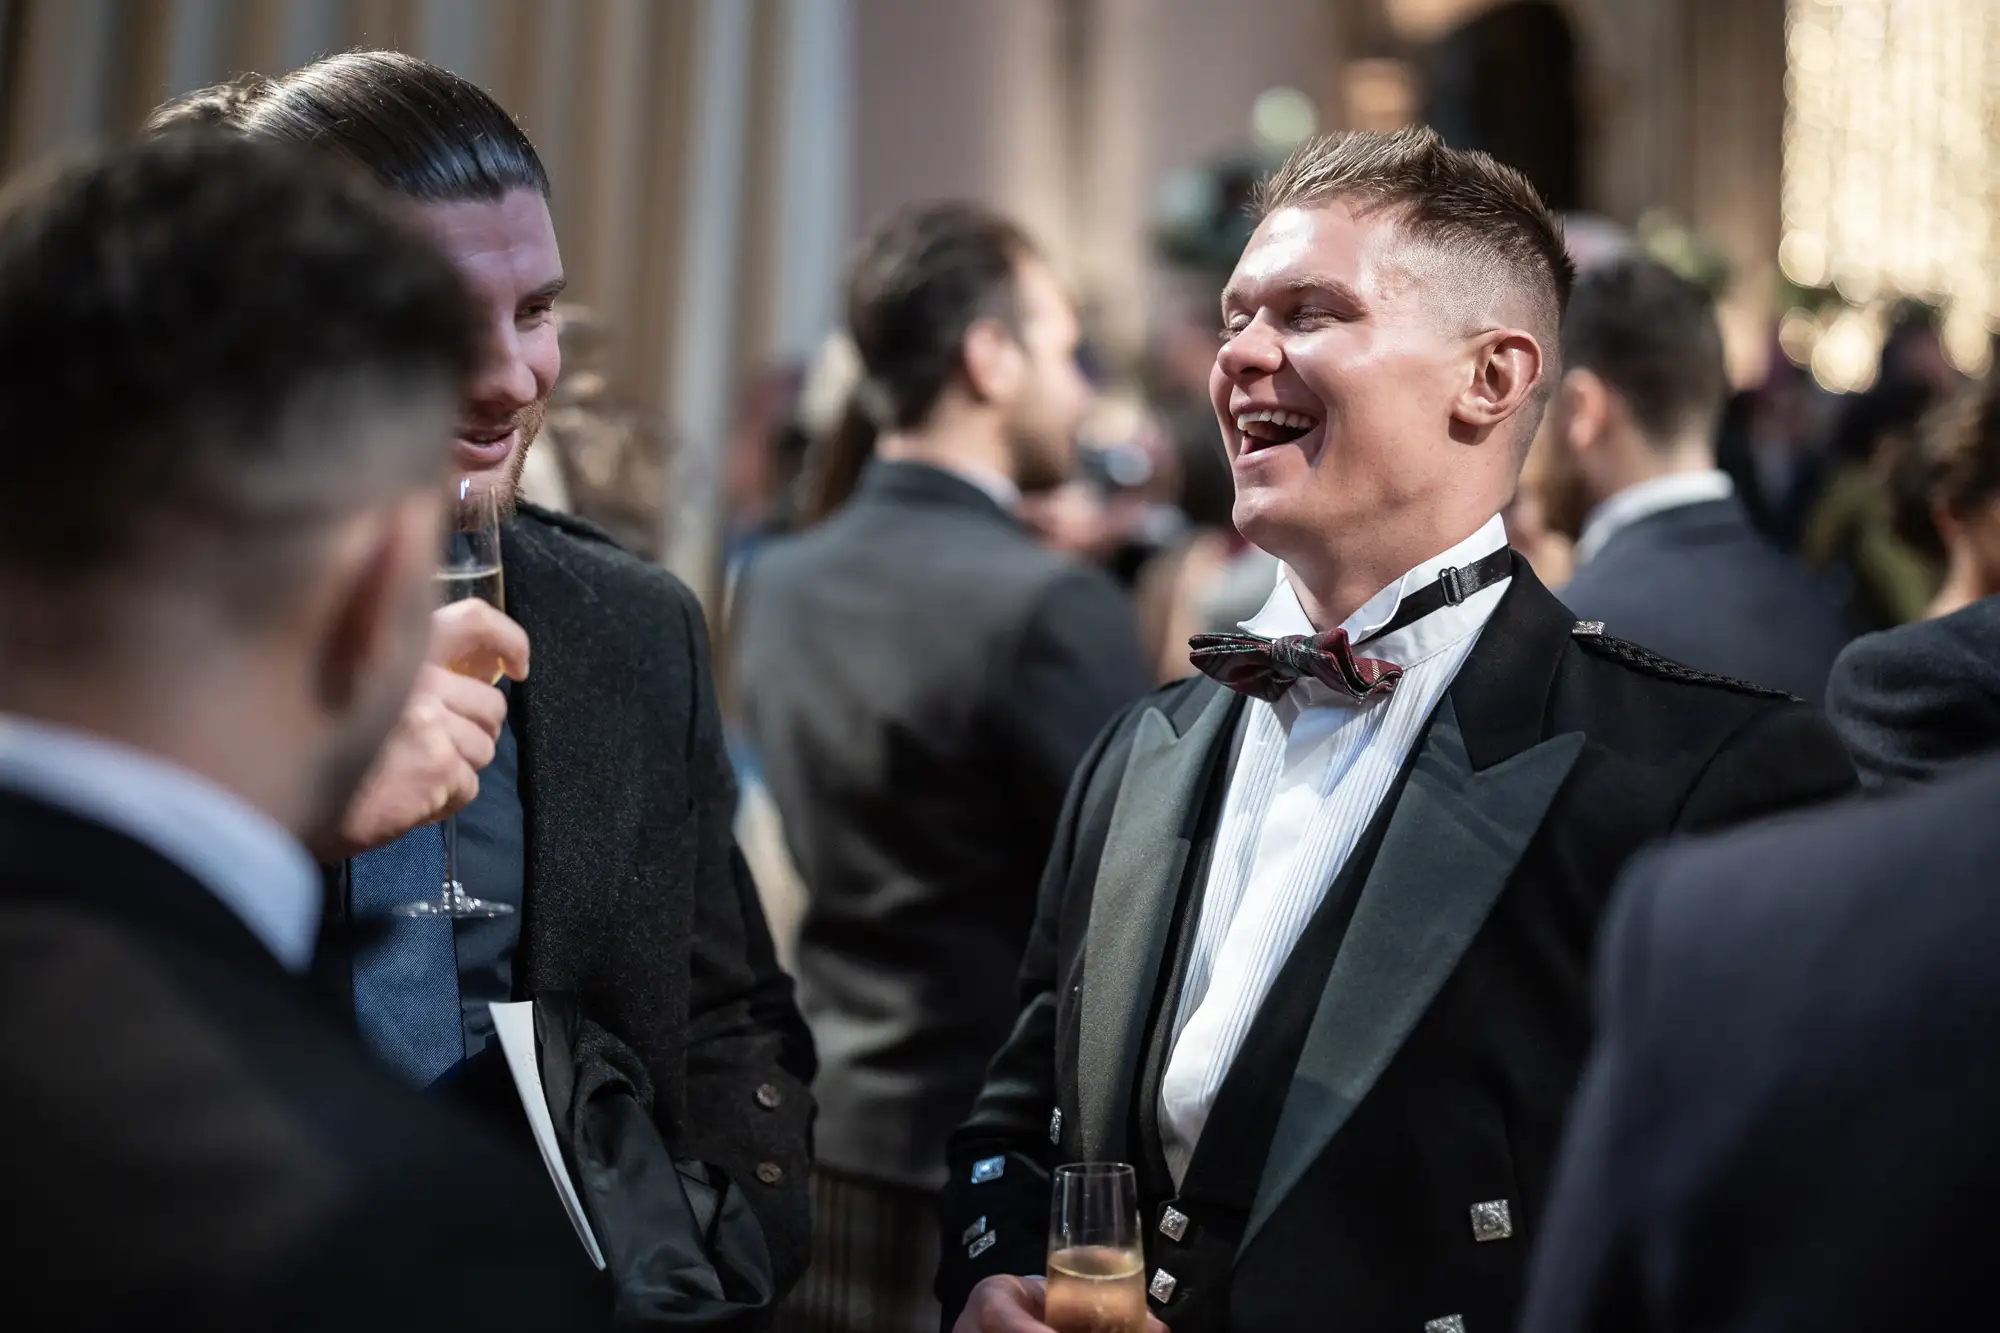 Two men in formal attire laugh and chat at a social event, one holding a glass of champagne.